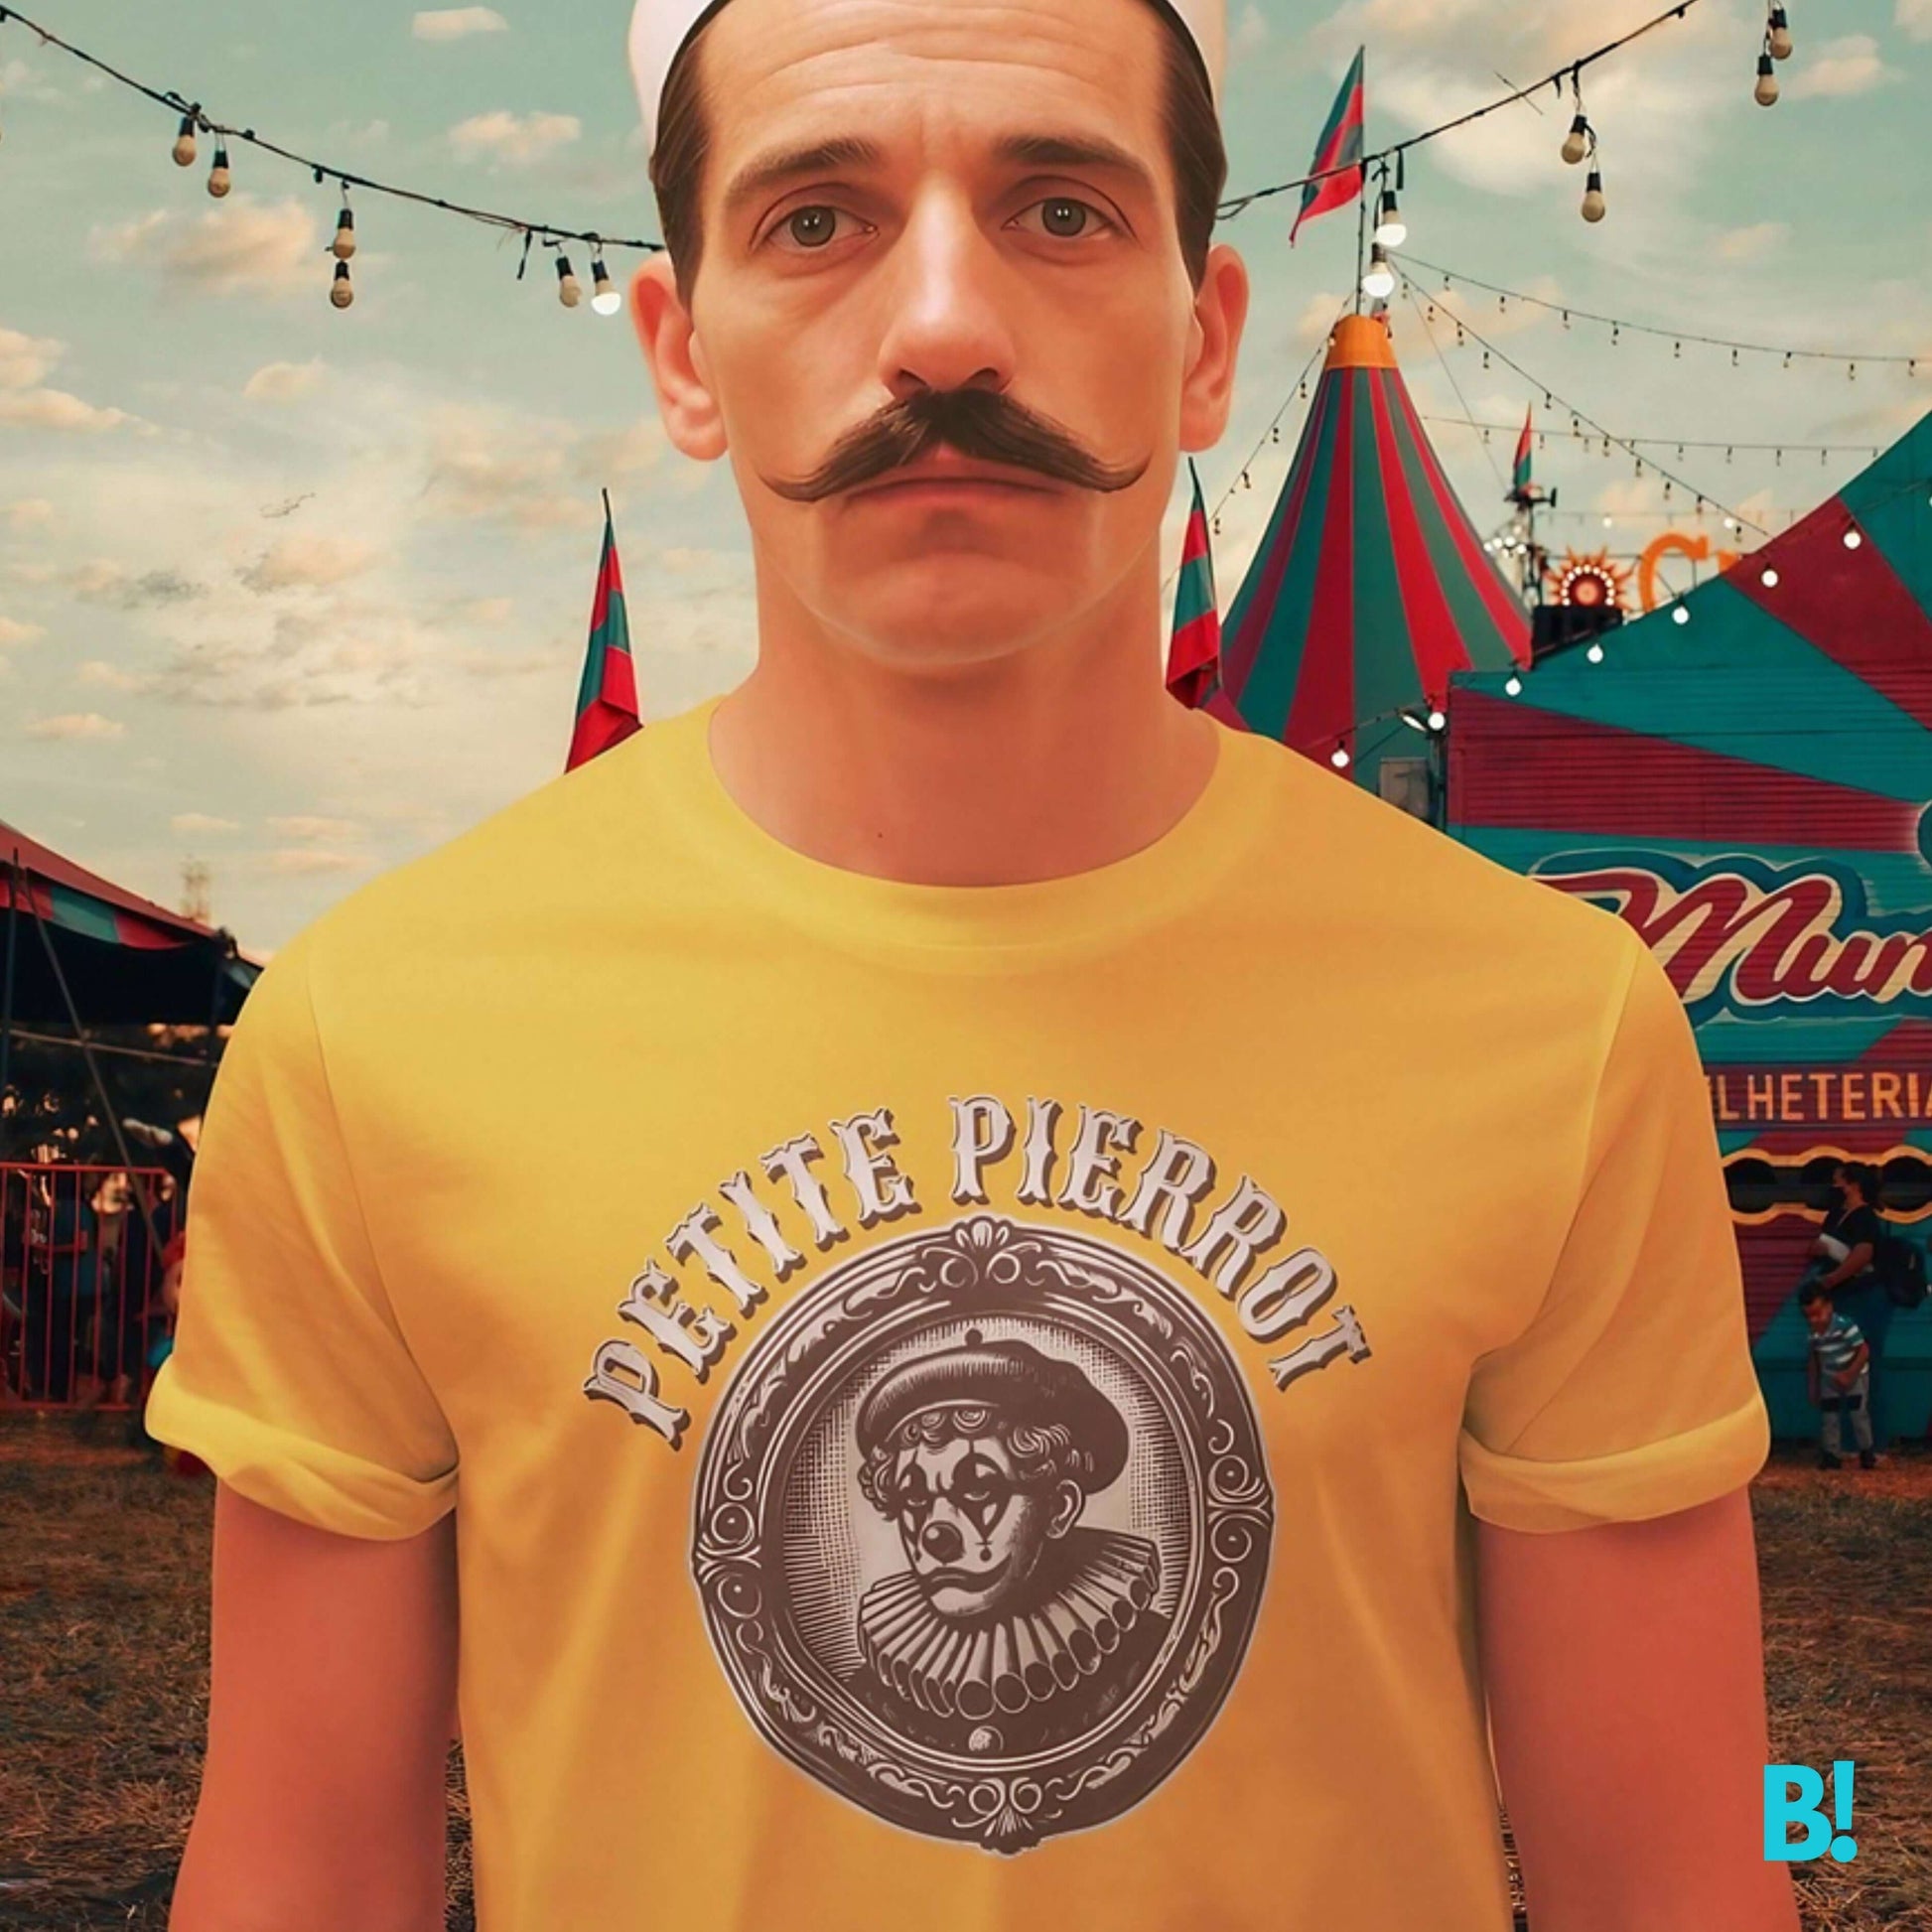 Petite Pierrot French Tattoo Retro Inspired Vintage T-Shirt Bonjour, dreamers! Step into a world of Petite Pierrot. This enchanting tee captures the magic of French circus charm with its playful design and colorful flair. Embrace your inner child join the